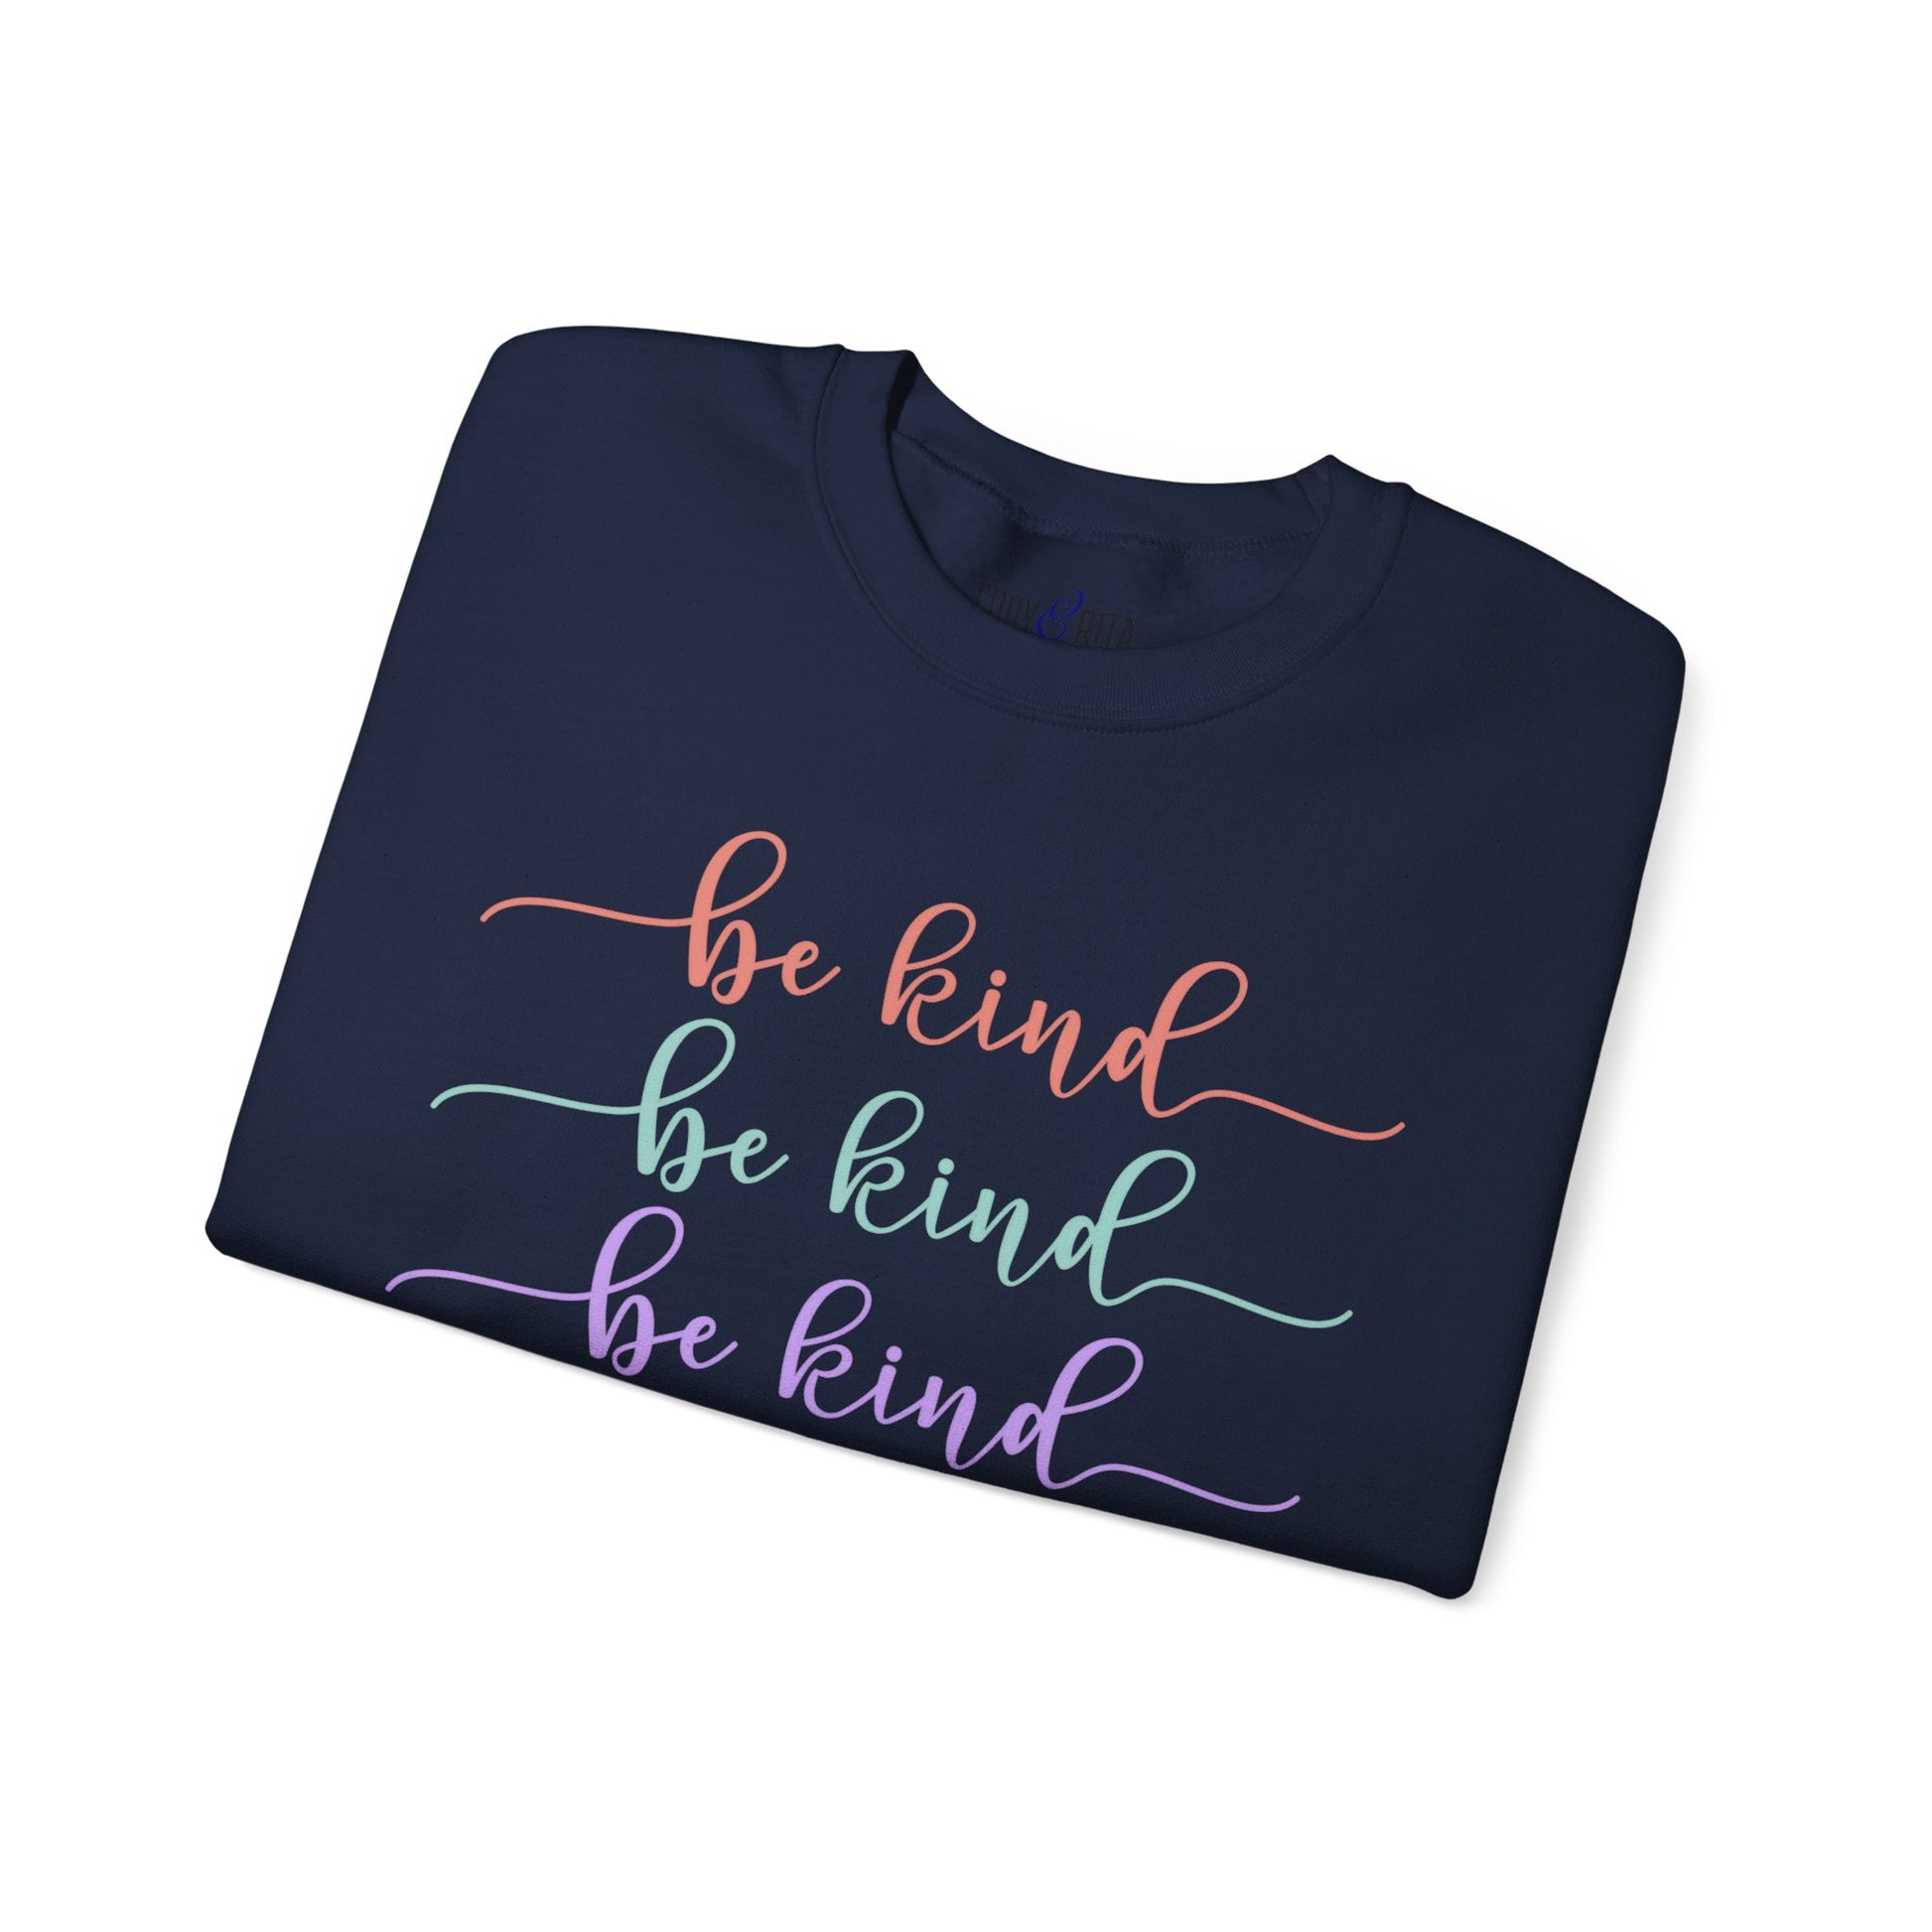 Be Kind: Women's Comfort Sweatshirt for Positive Vibes and Stylish Warmth - Eddy and Rita